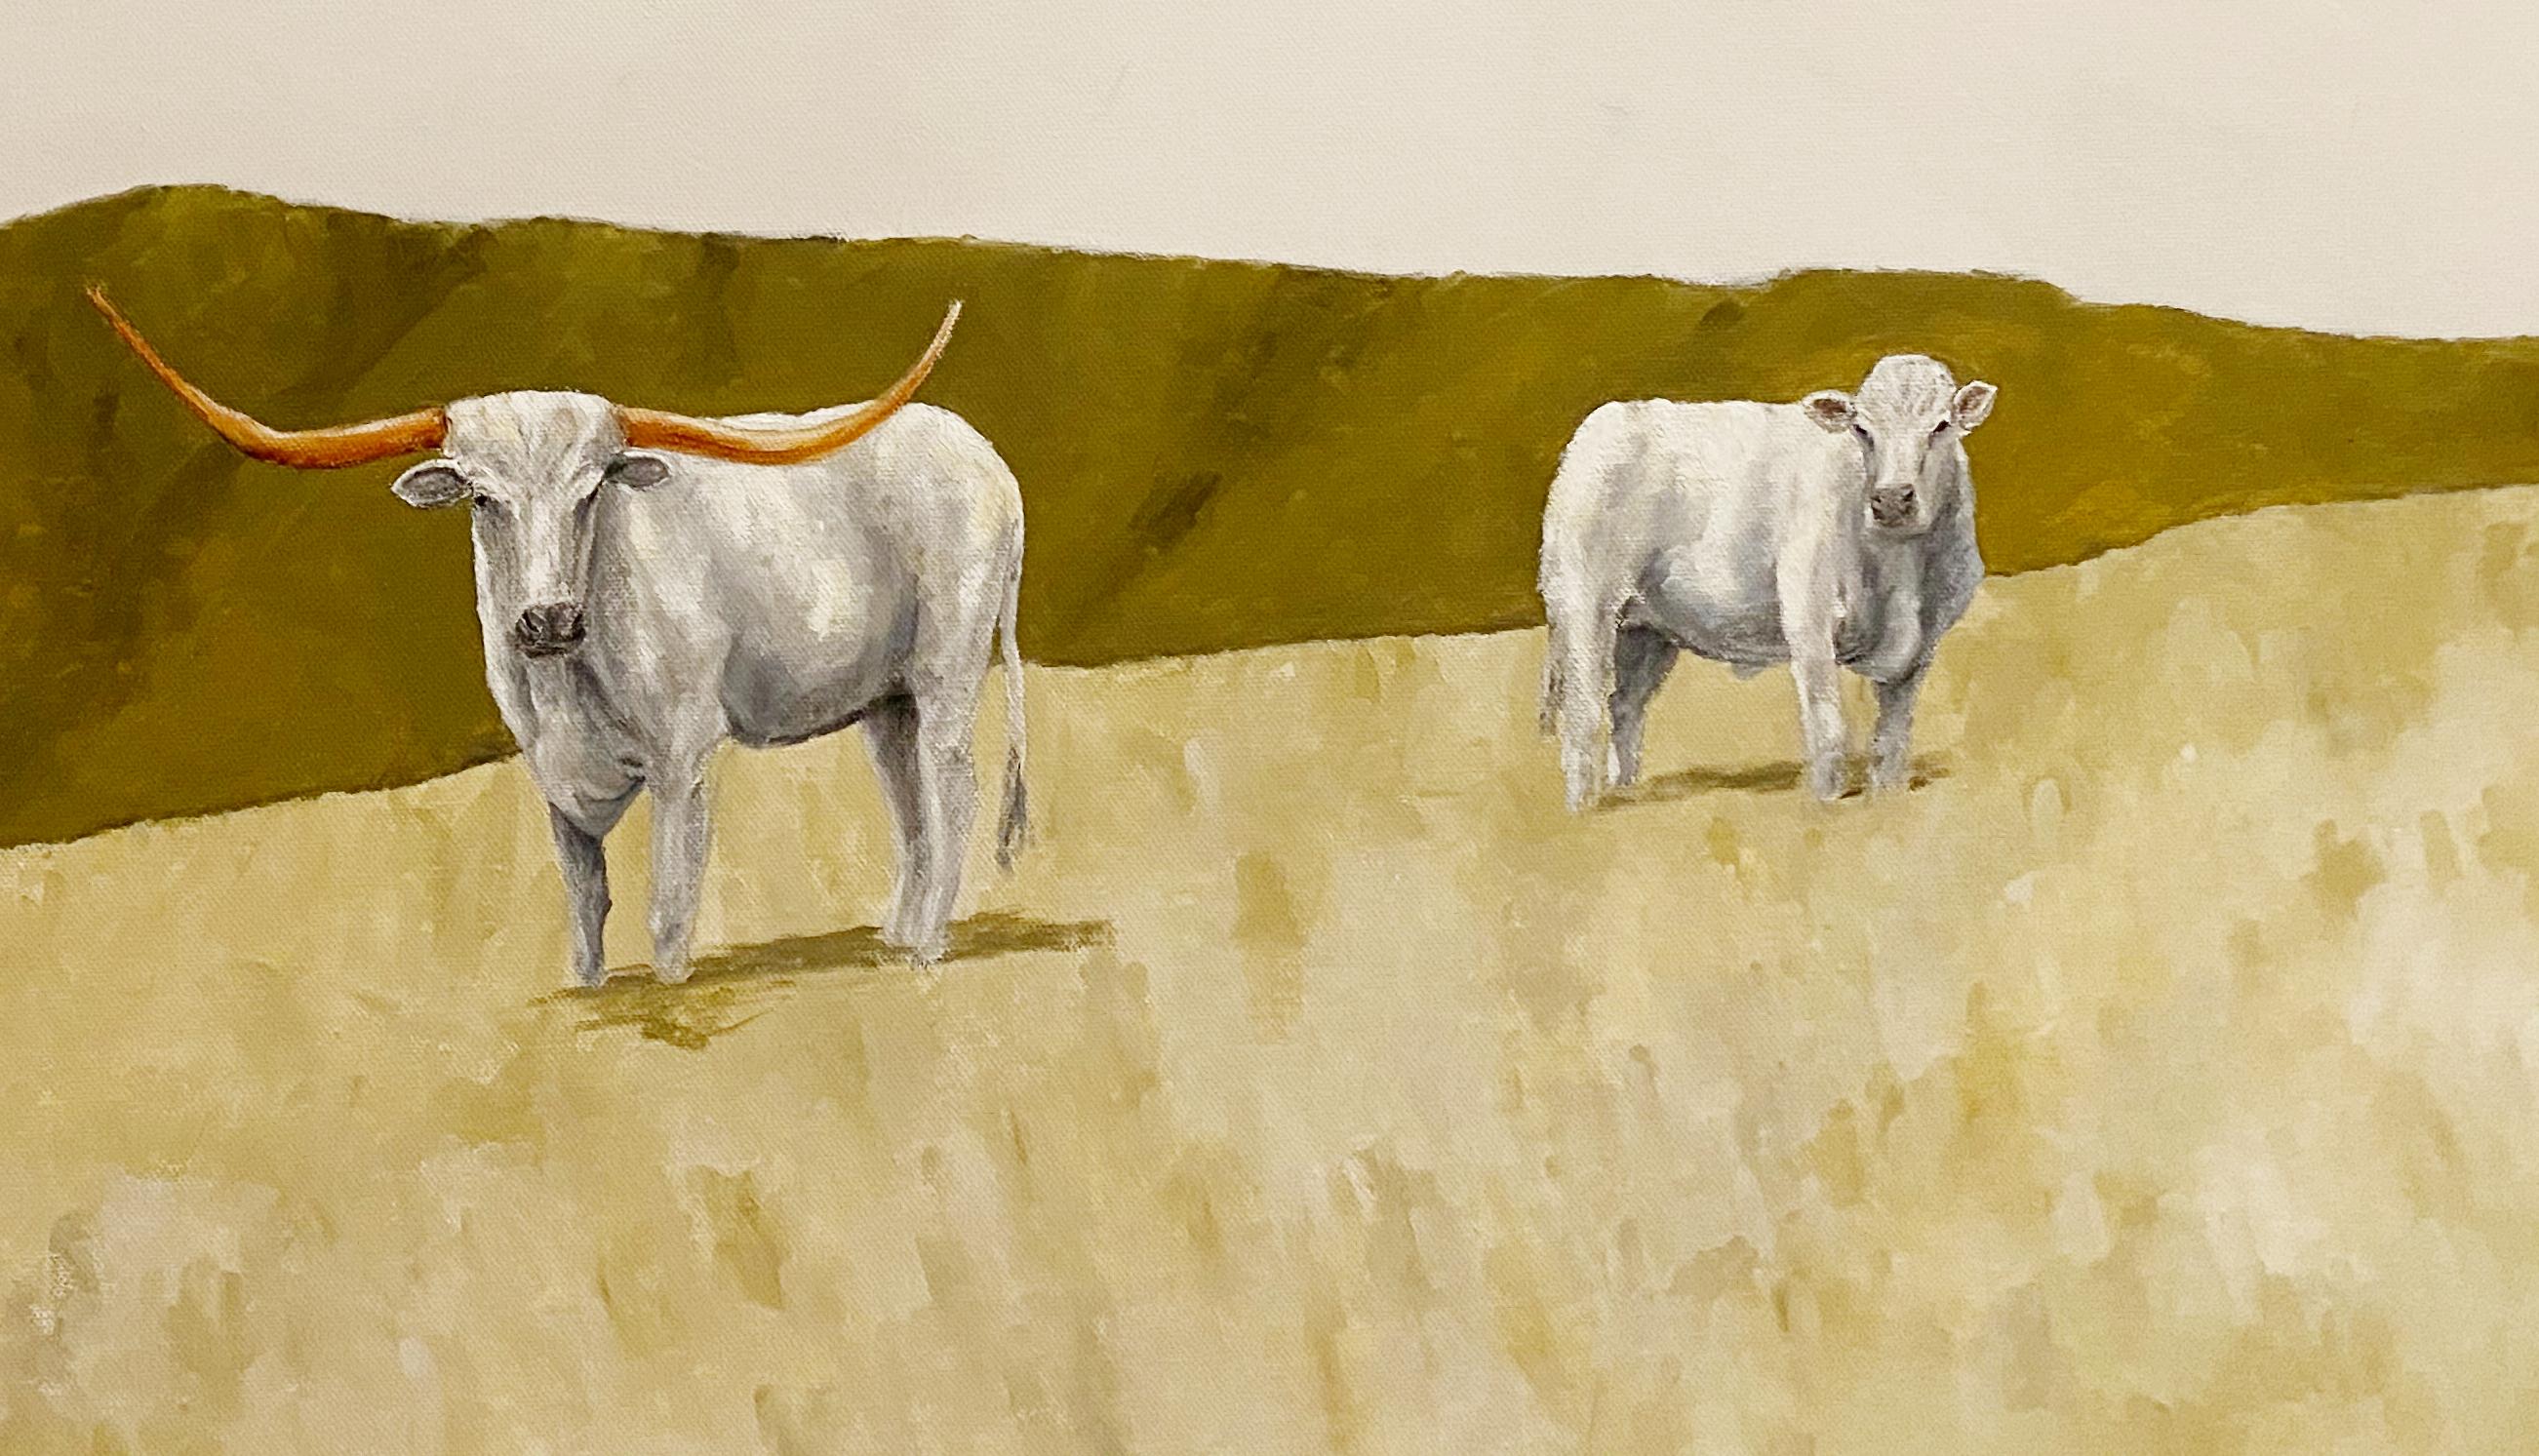 Green Pasture, Texas Artist, Realist, Light and Shadow, Texas Cattle, Rodeo - Painting by Luke Autrey